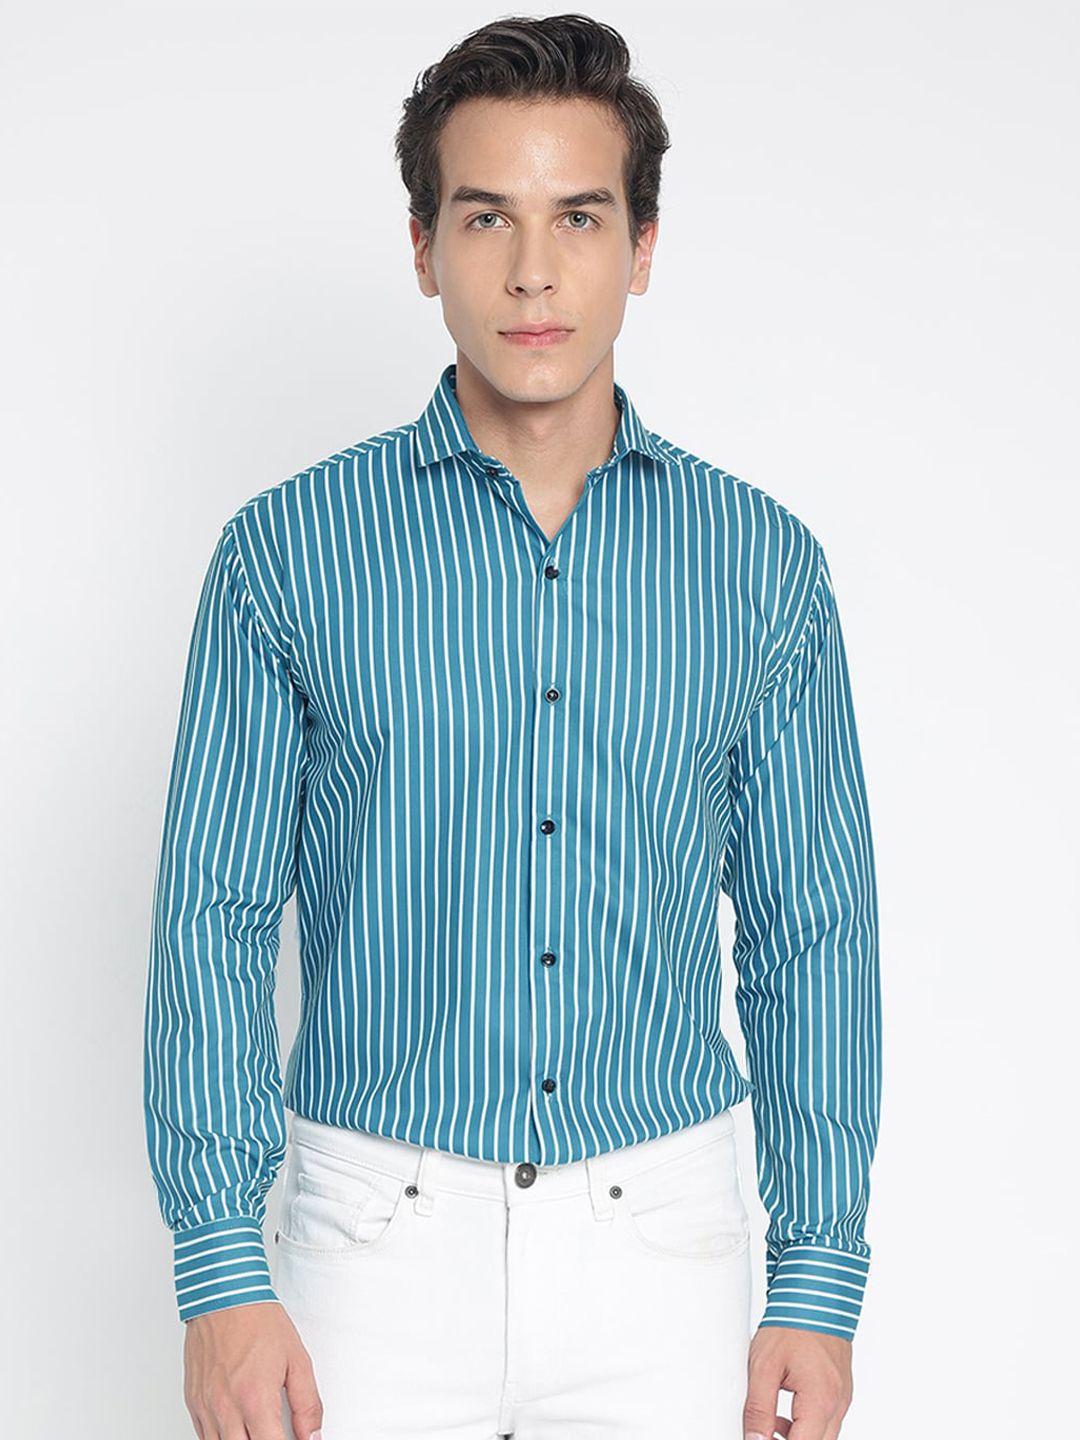 colorwings comfort slim fit striped casual shirt